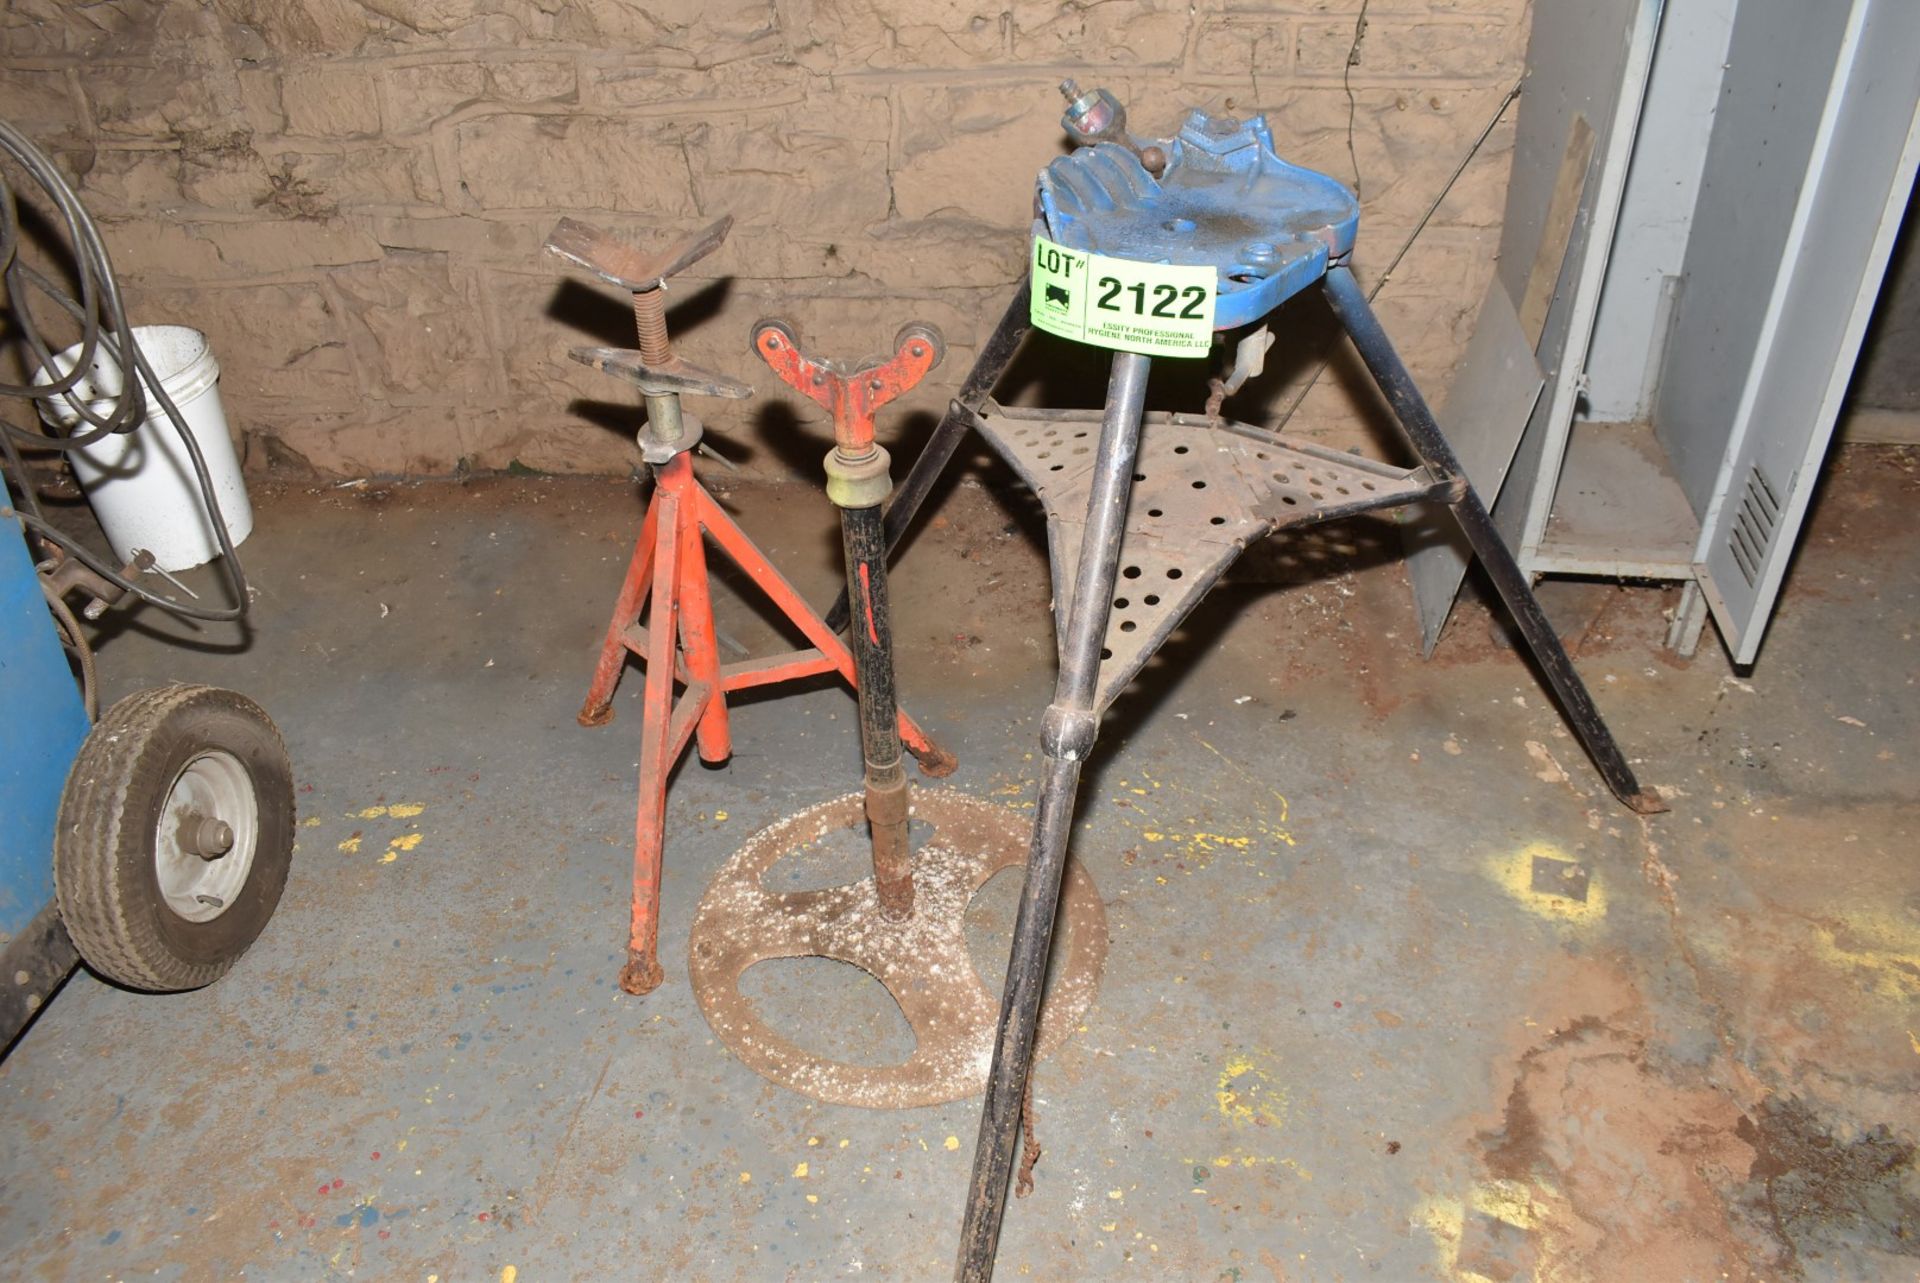 LOT/ RIDGID No.450 TRI-STAND WITH ROLLER STAND [RIGGING FEES FOR LOT #2122 - $50 USD PLUS APPLICABLE